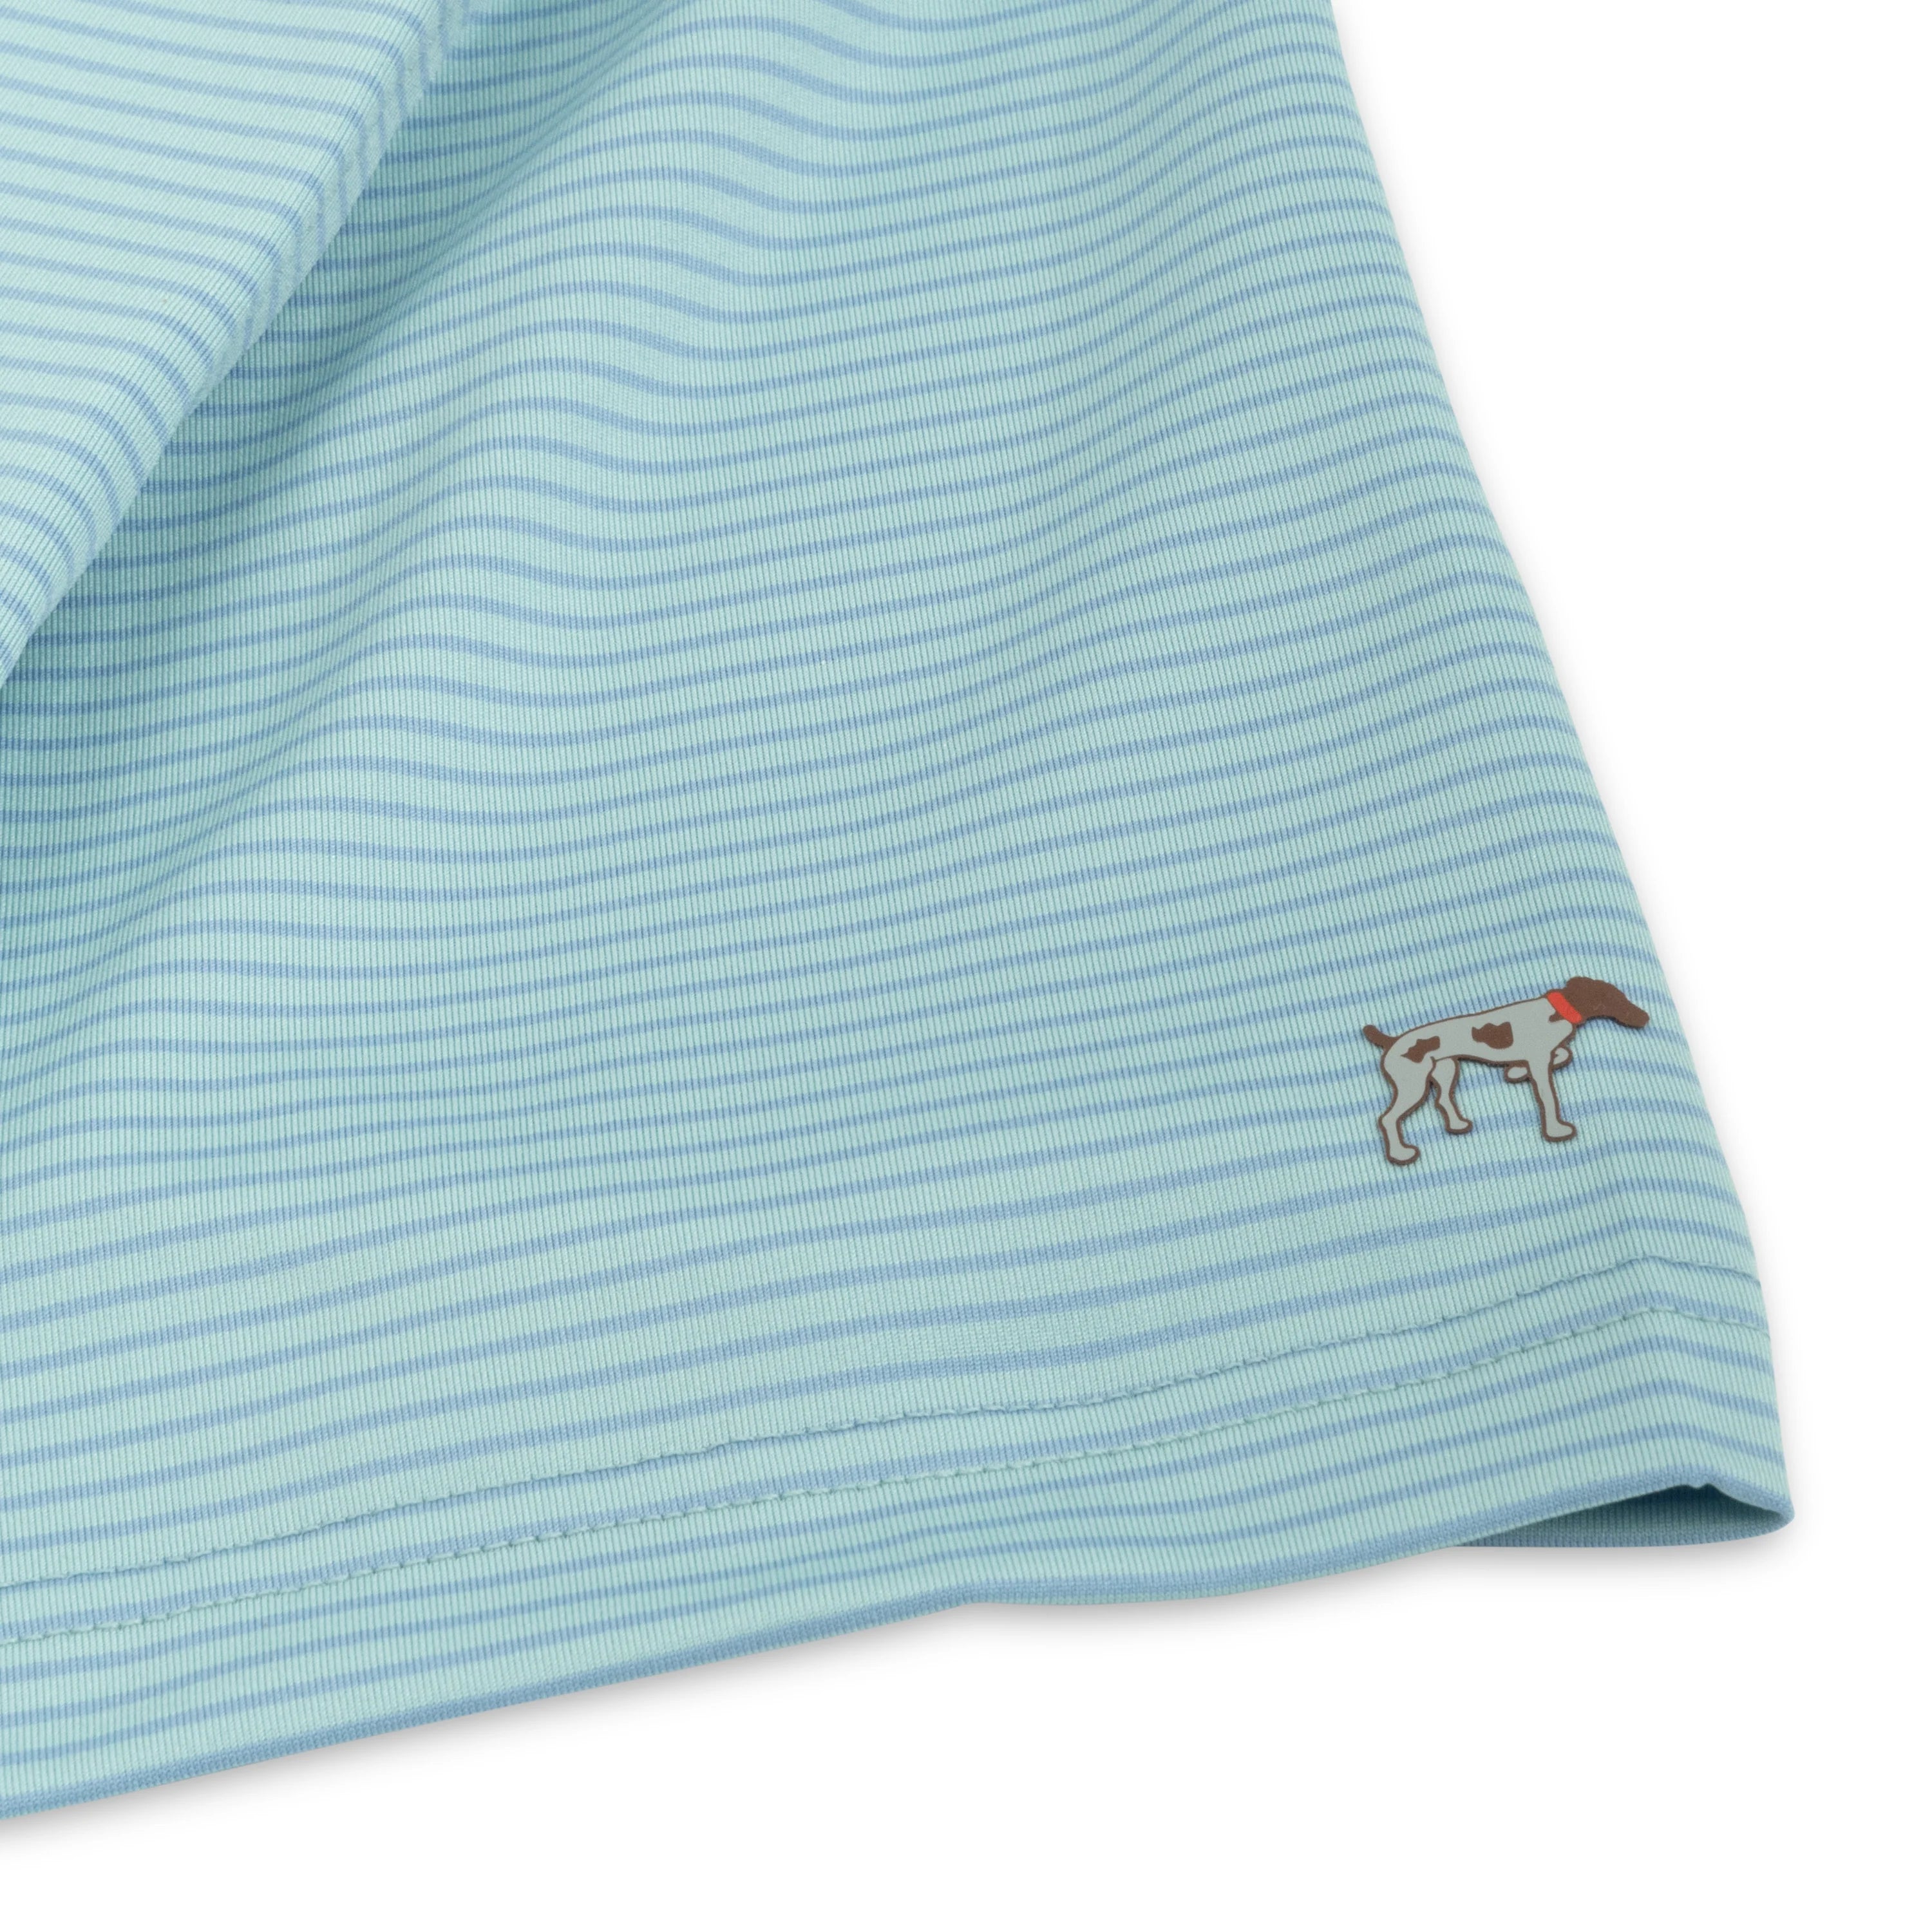 Seaside Dusty Blue Polo by Southern Point Co.